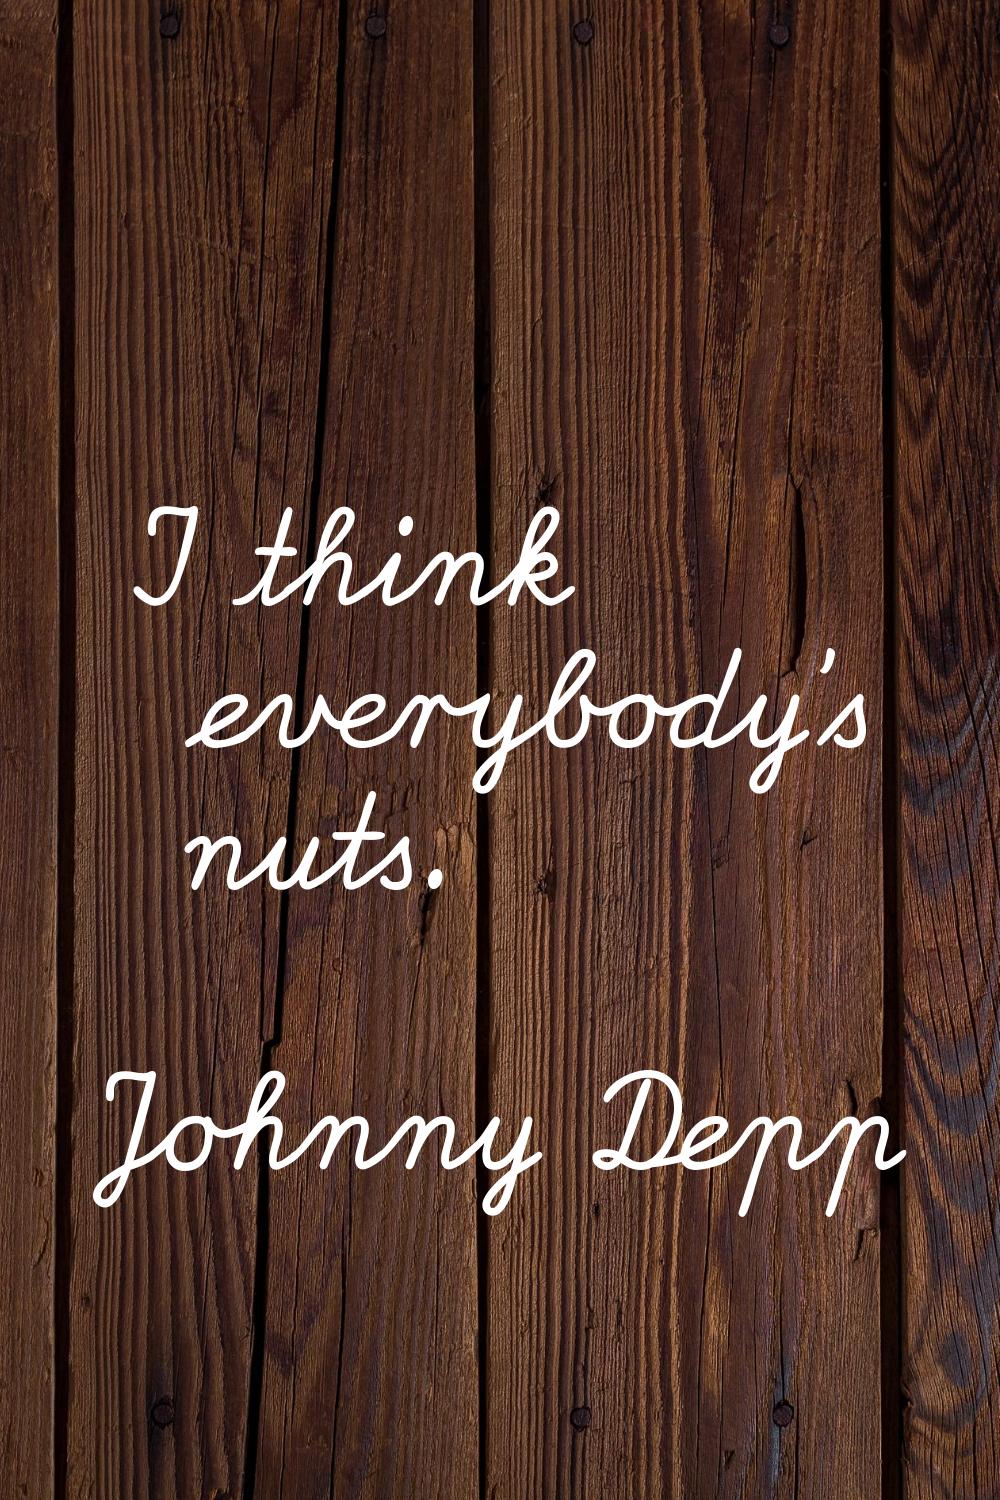 I think everybody's nuts.